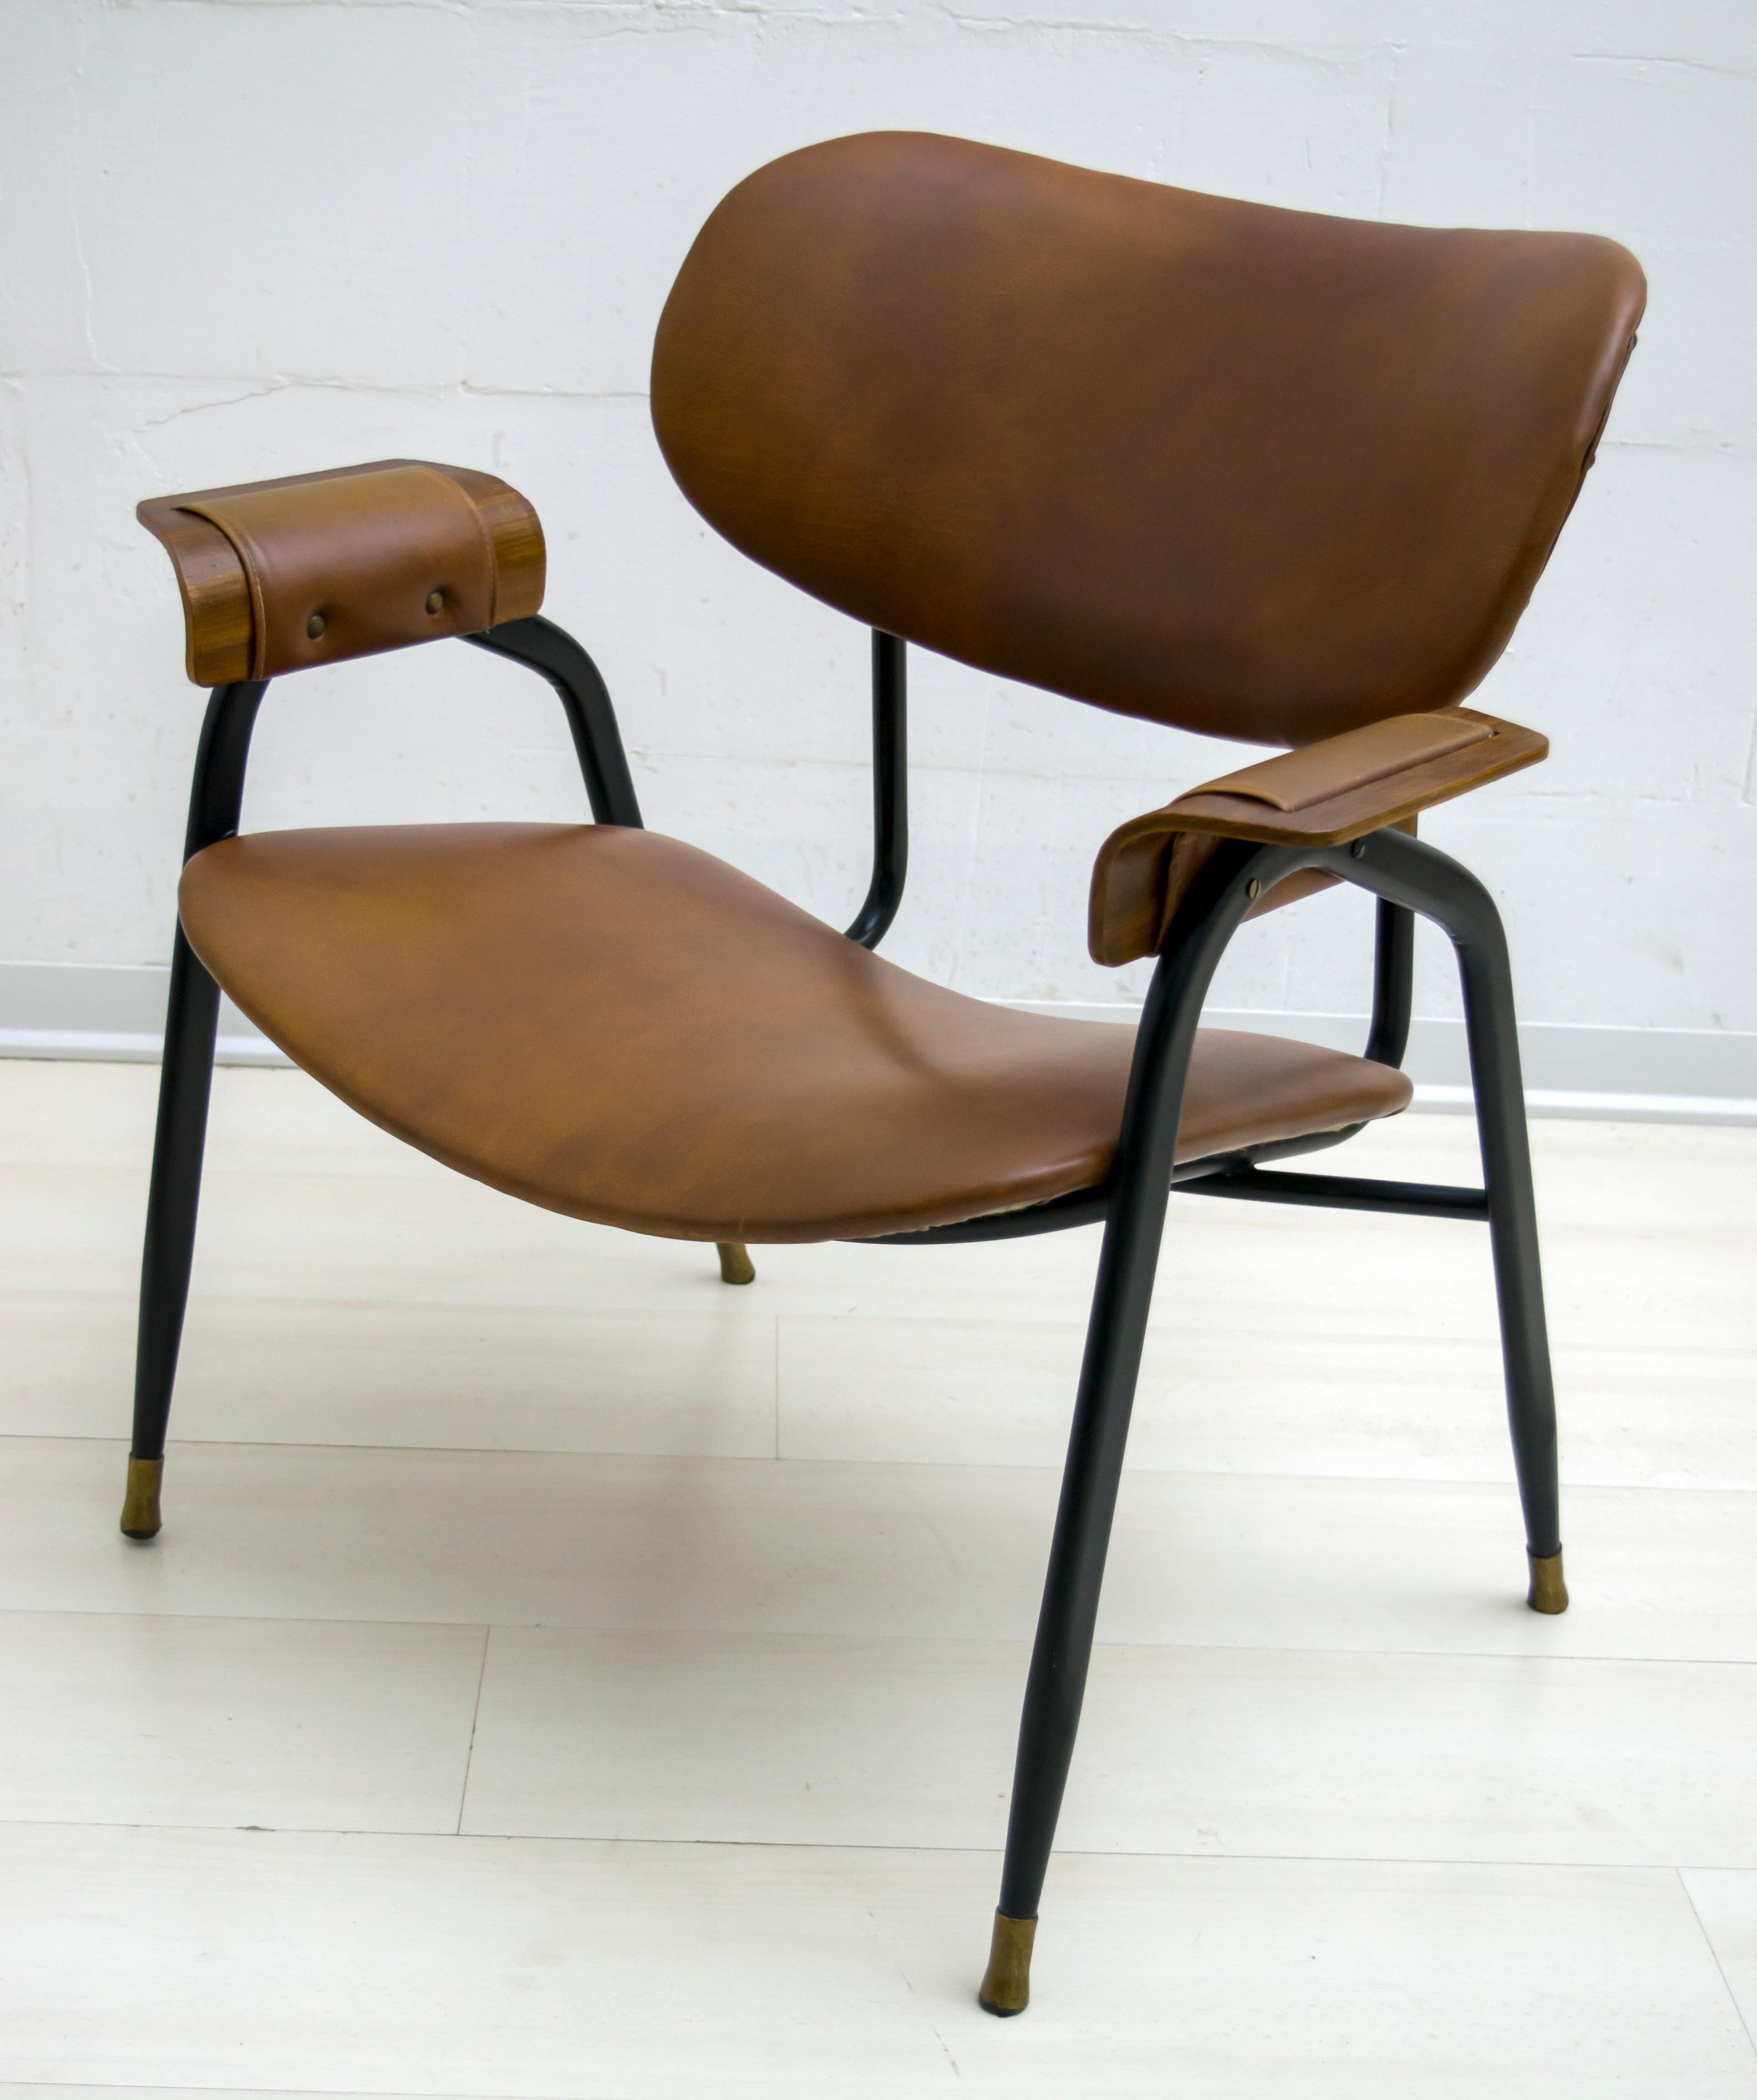 Armchair produced in the 1960s by Rima based on a design by Gastone Rinaldi.
Tubular structure in black painted metal,
Seat and backrest padded and lined in leather-colored eco-leather.
Armrests in curved teak plywood, with an eco-leather